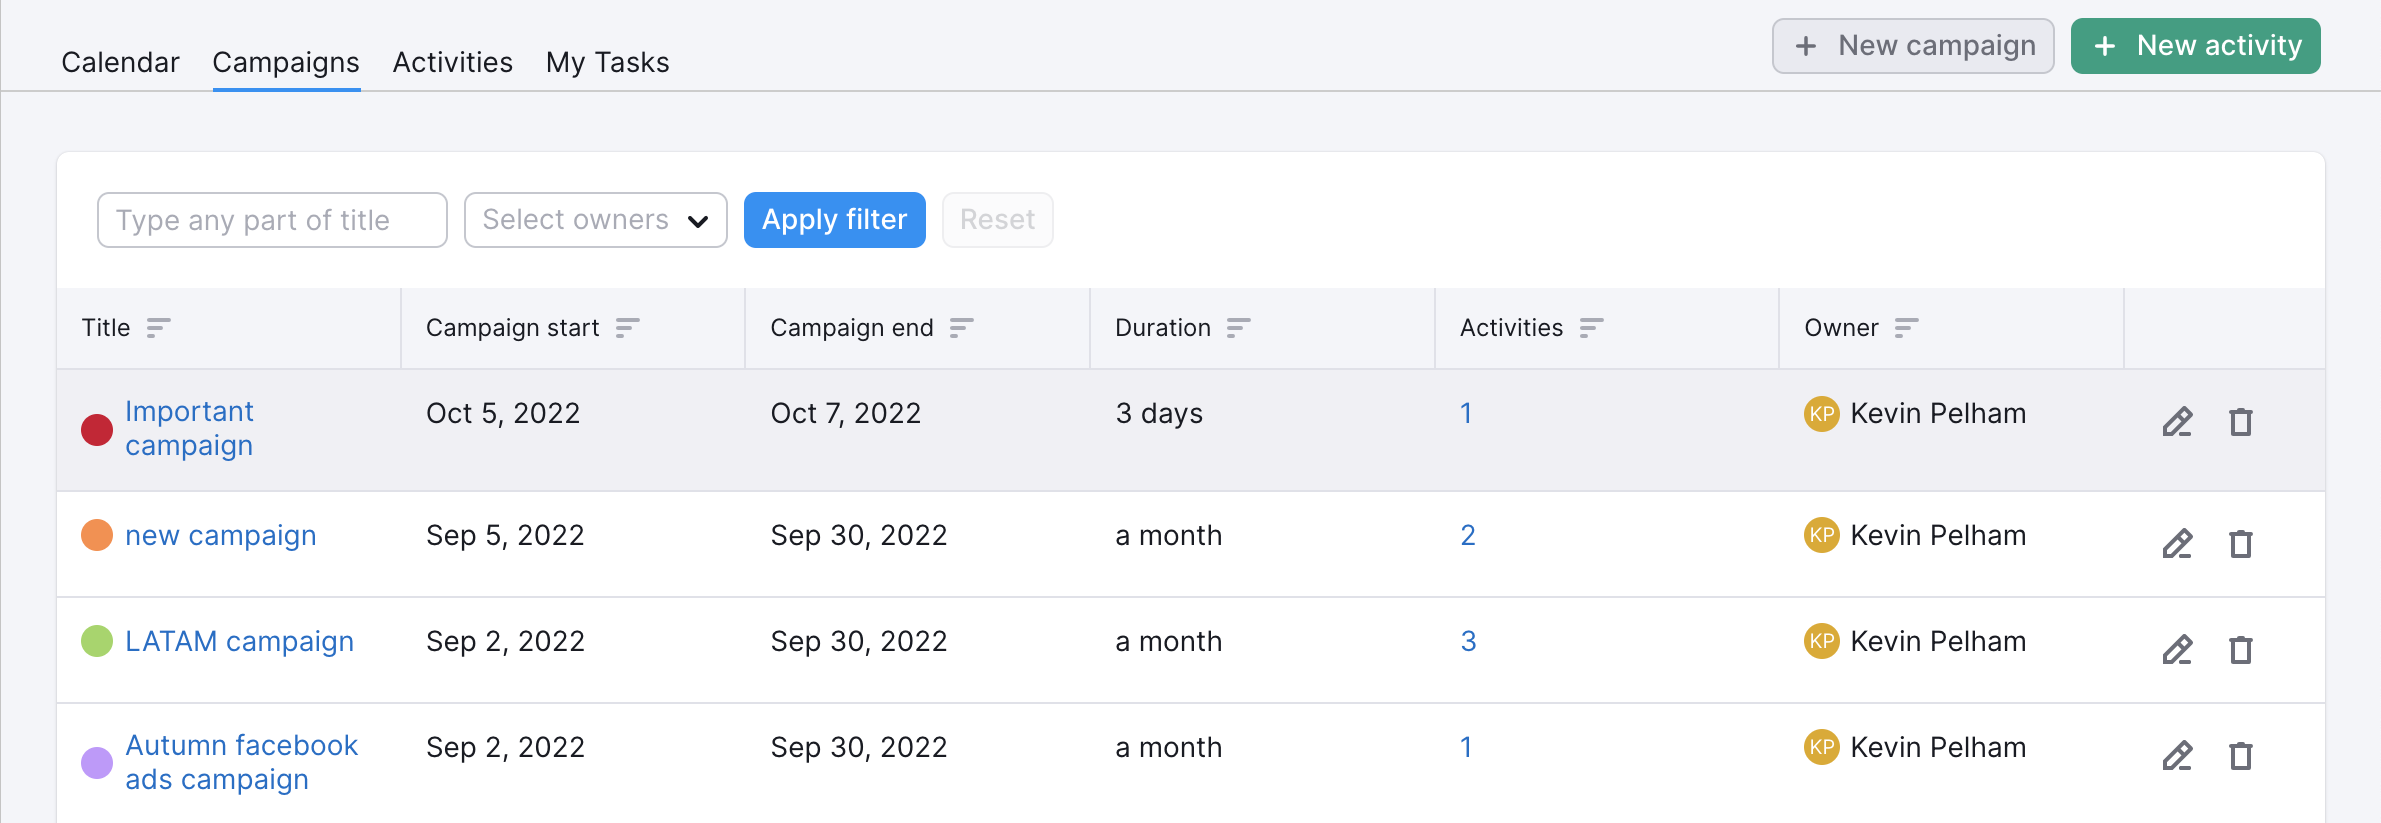 An example of the campaigns list in the Marketing Calendar Campaigns tab.